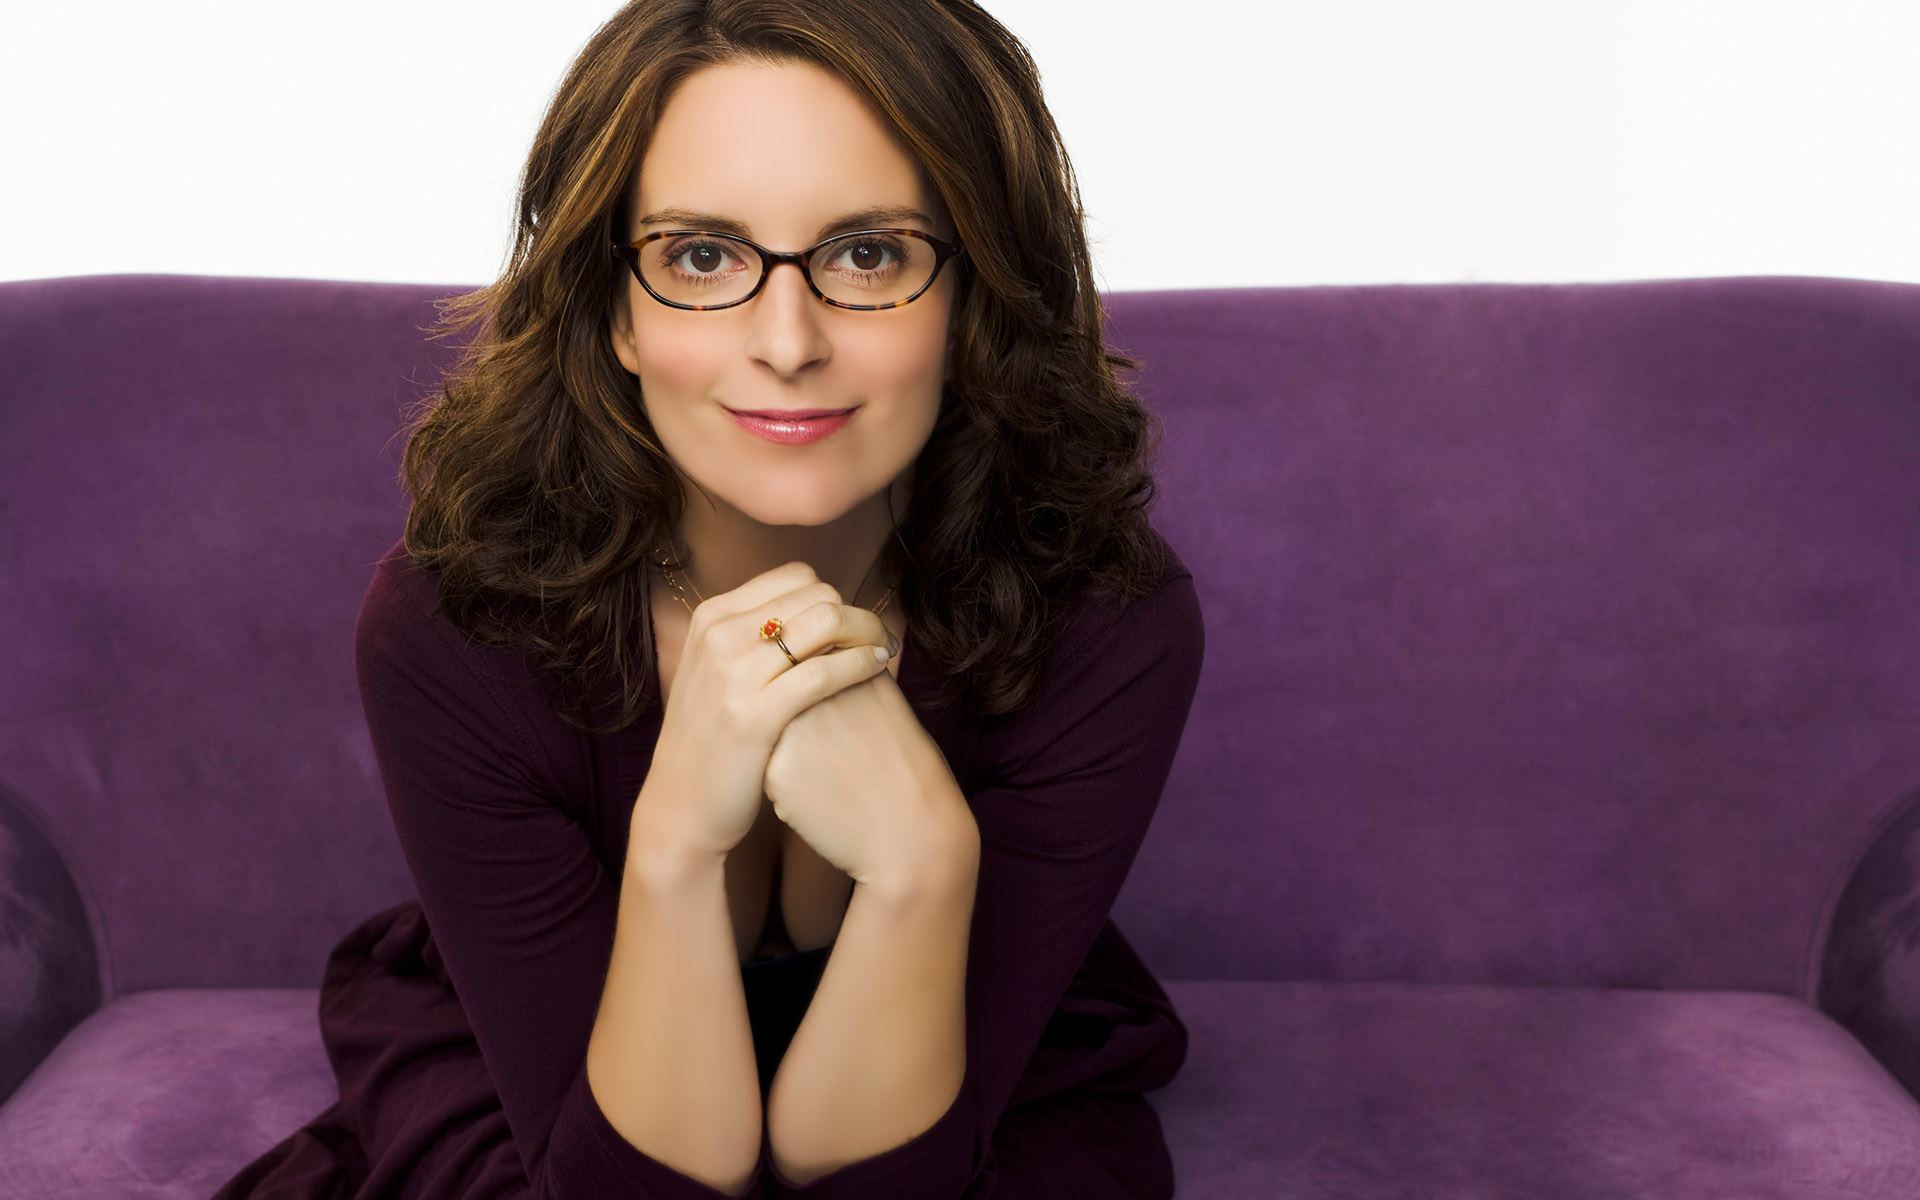 Tina Fey Desktop Wallpapers - HD Wallpapers Backgrounds of Your Choice